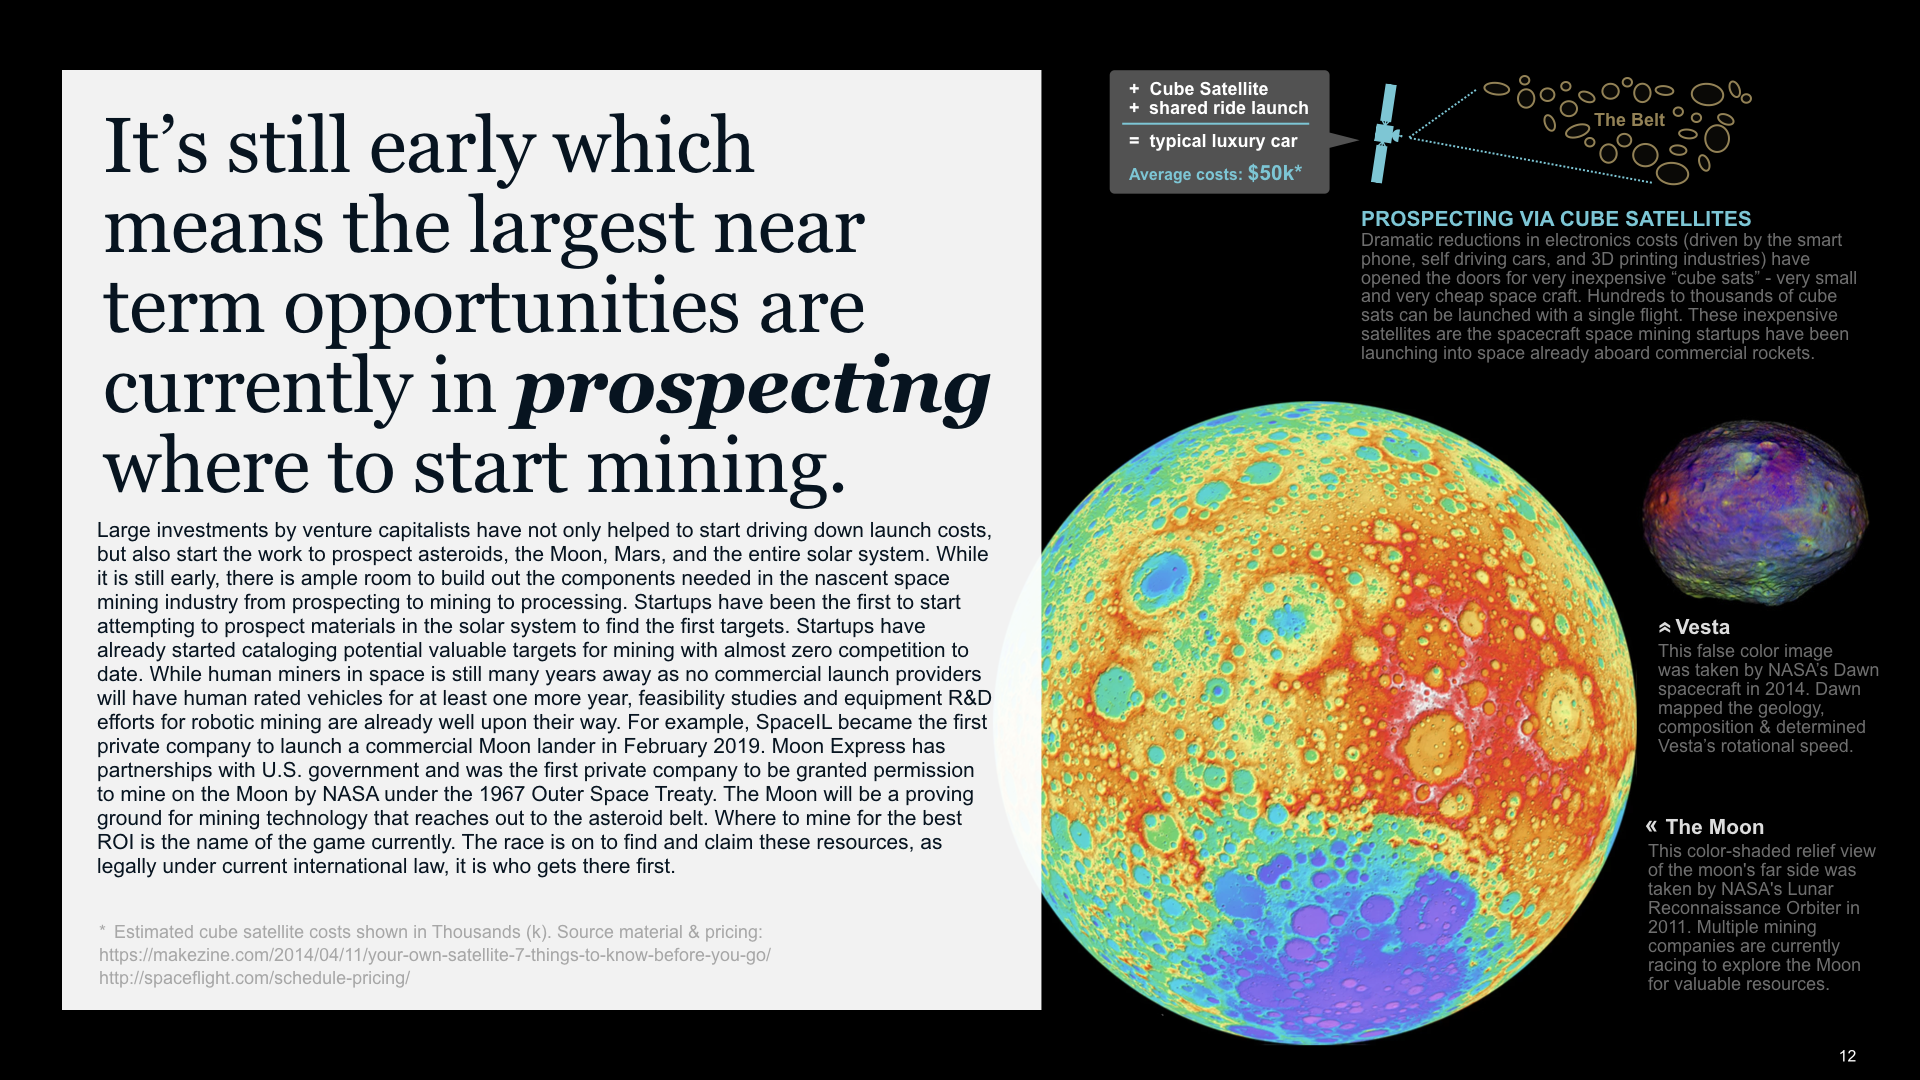 McKinsey_SpaceEconomy2019_MINING_overview_v019.012.png